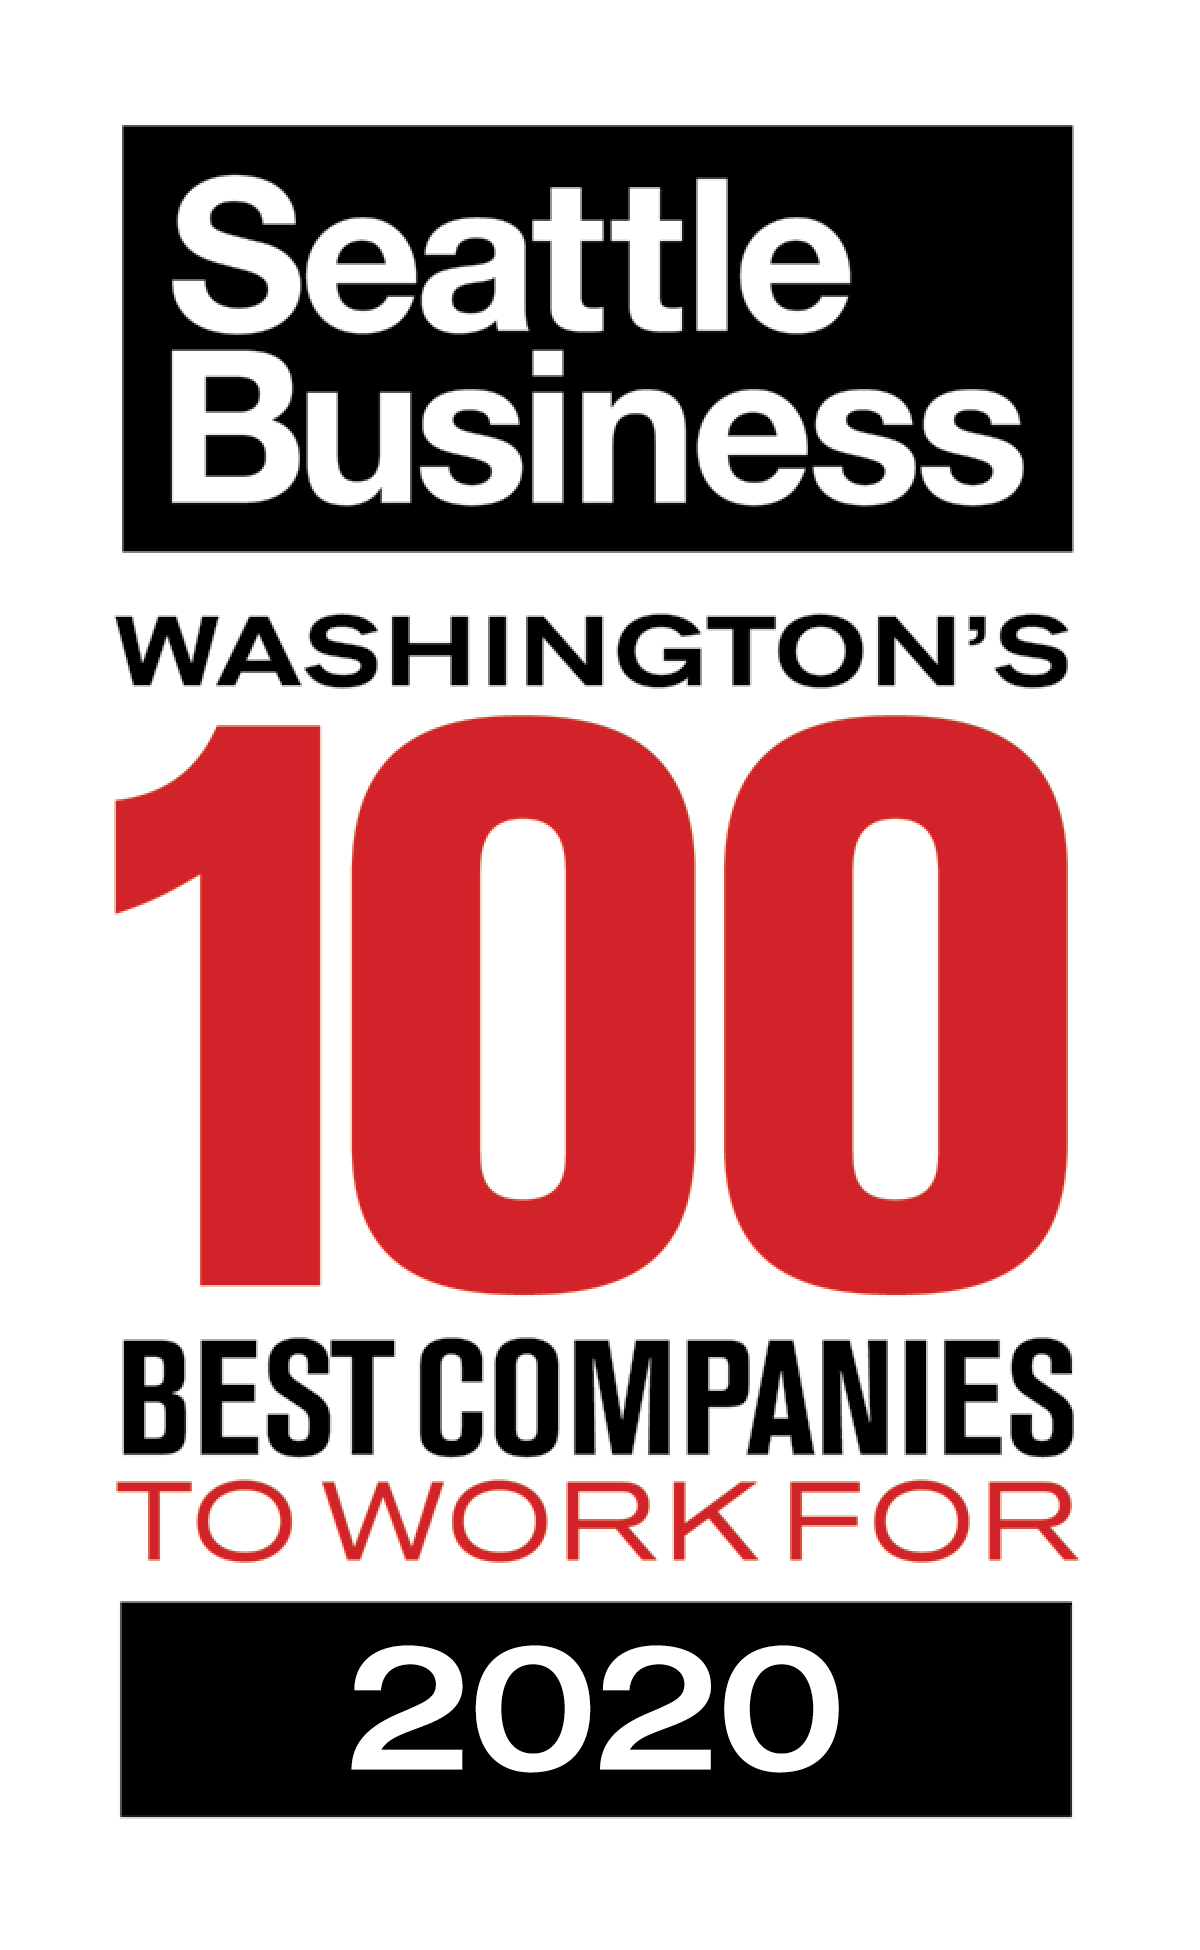 Seattle Business Magazine's 100 Best Companies to Work for 2020